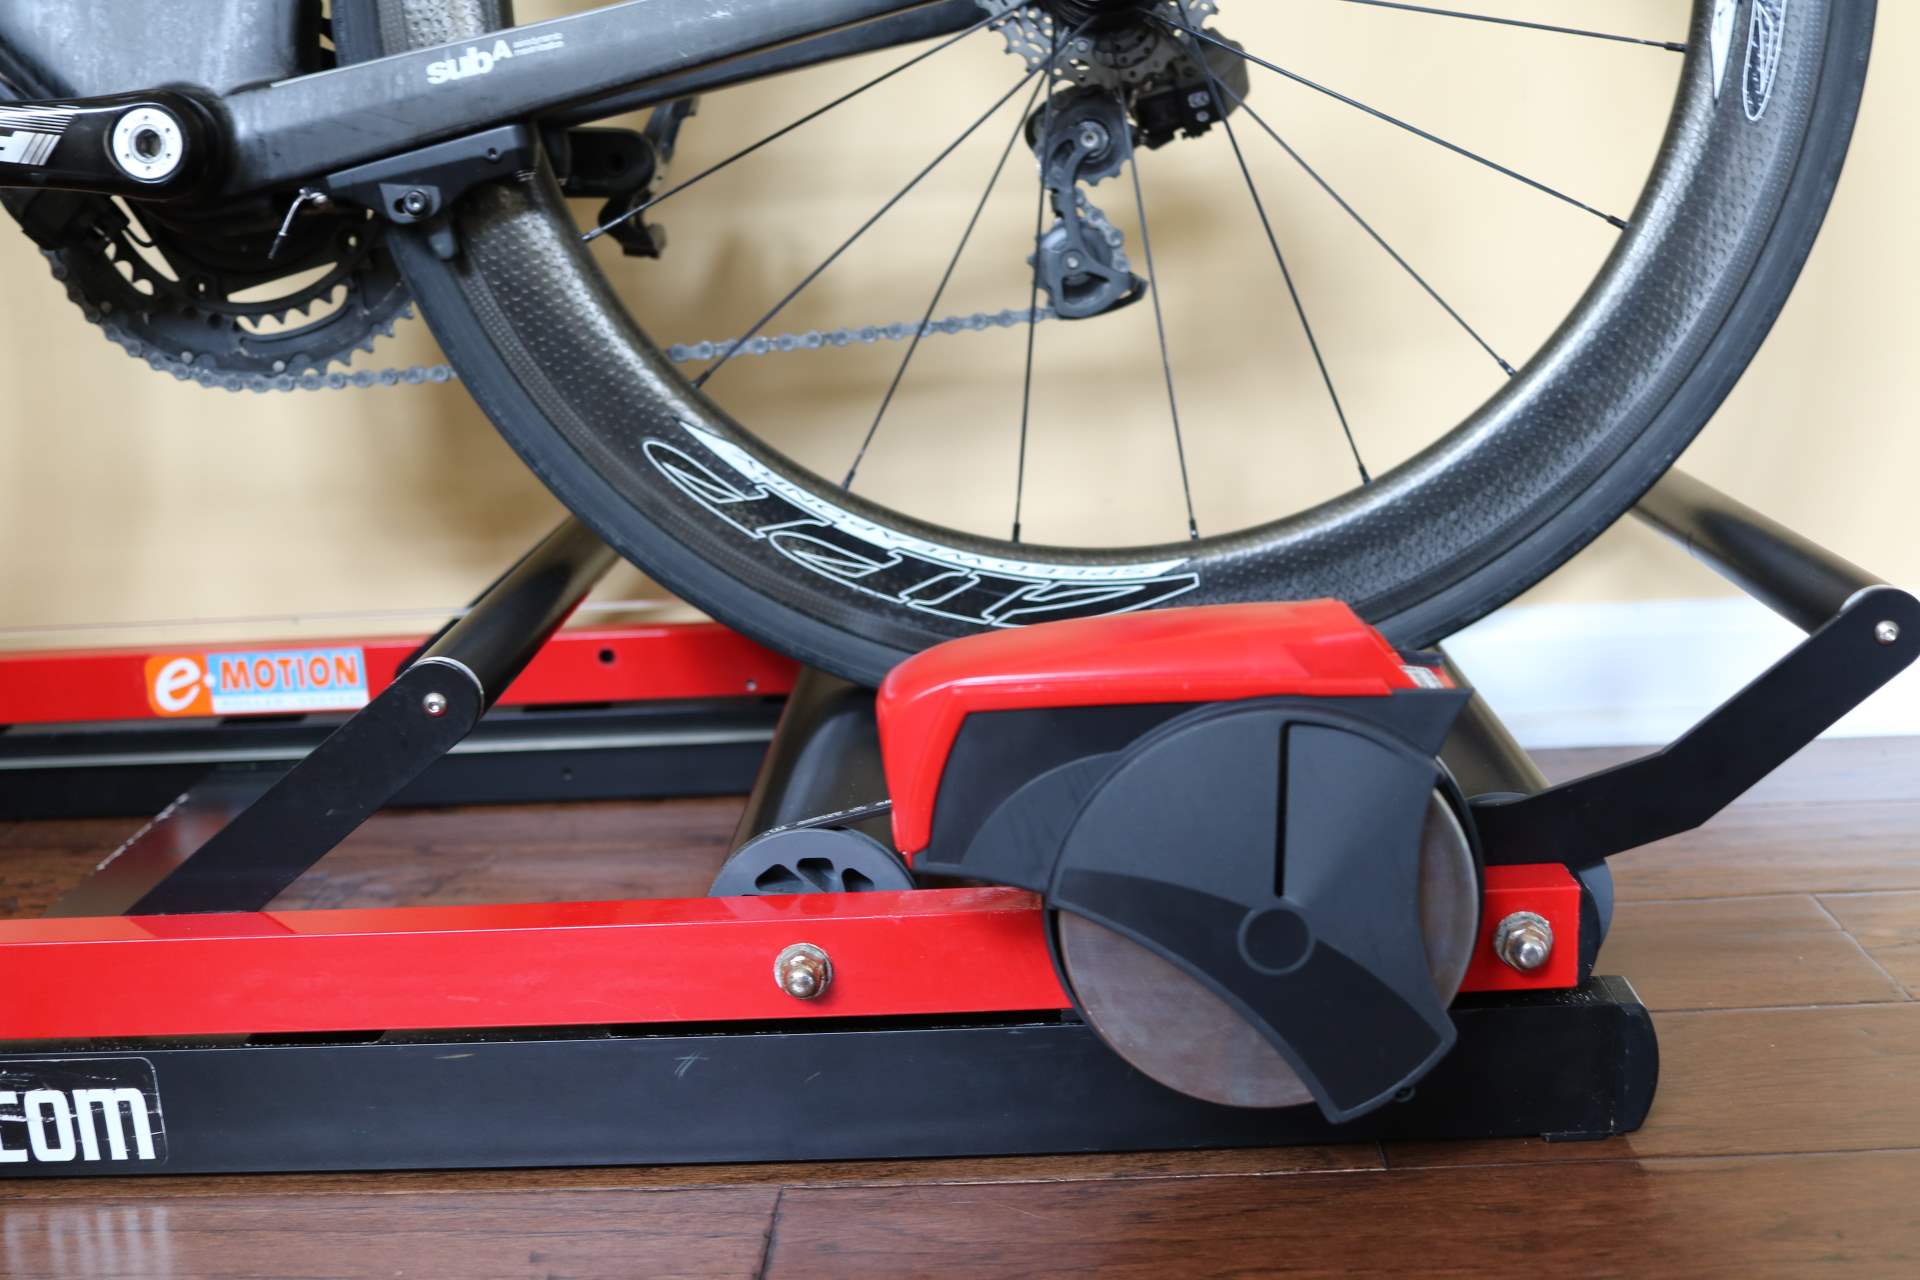 smart rollers cycling